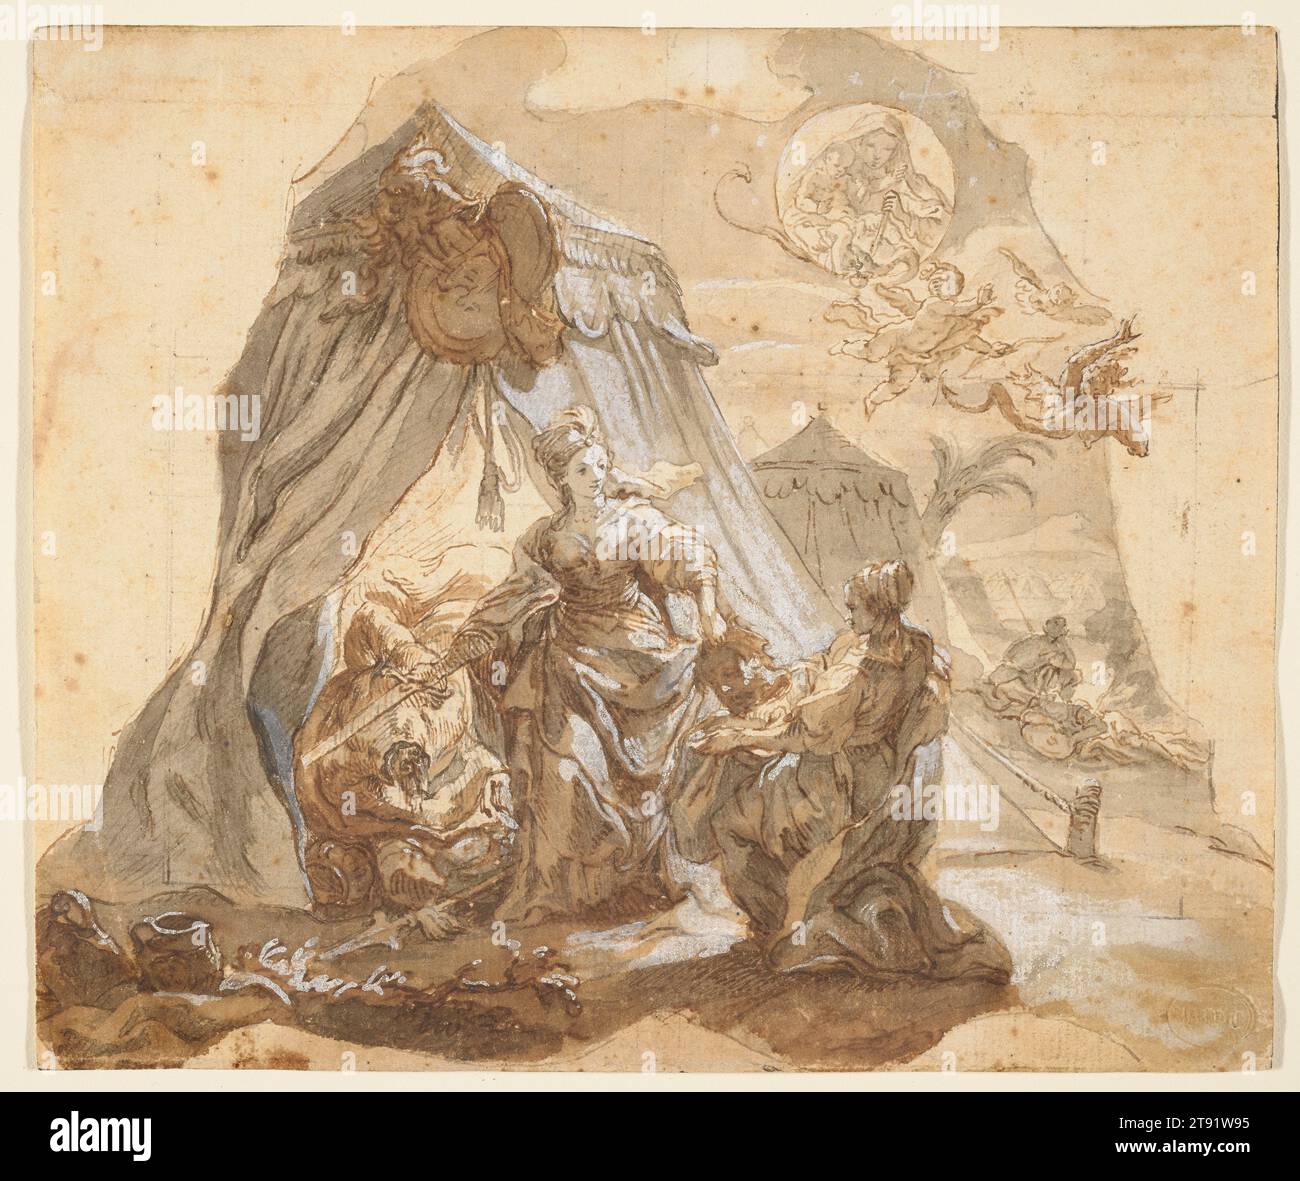 Judith with the Head of Holofernes, and a Vision of the Virgin and Child Casting Out Evil, c. 1749, Gottfried Bernhard Göz; Artist: Formerly attributed to Unknown Italian, 5 3/4 x 6 13/16 in. (14.61 x 17.3 cm) (sheet), Pen, brown ink and wash, heightened with white gouache, Germany, 18th century, This wash drawing is a preparatory study for one of Gottfried Bernhard Göz's painted church ceilings, which were fixtures of 18th-century Bavaria. (The wash technique is oddly appropriate: Holofernes had subjugated Judith's people by cutting off their water supply, and it will be restored with his Stock Photo